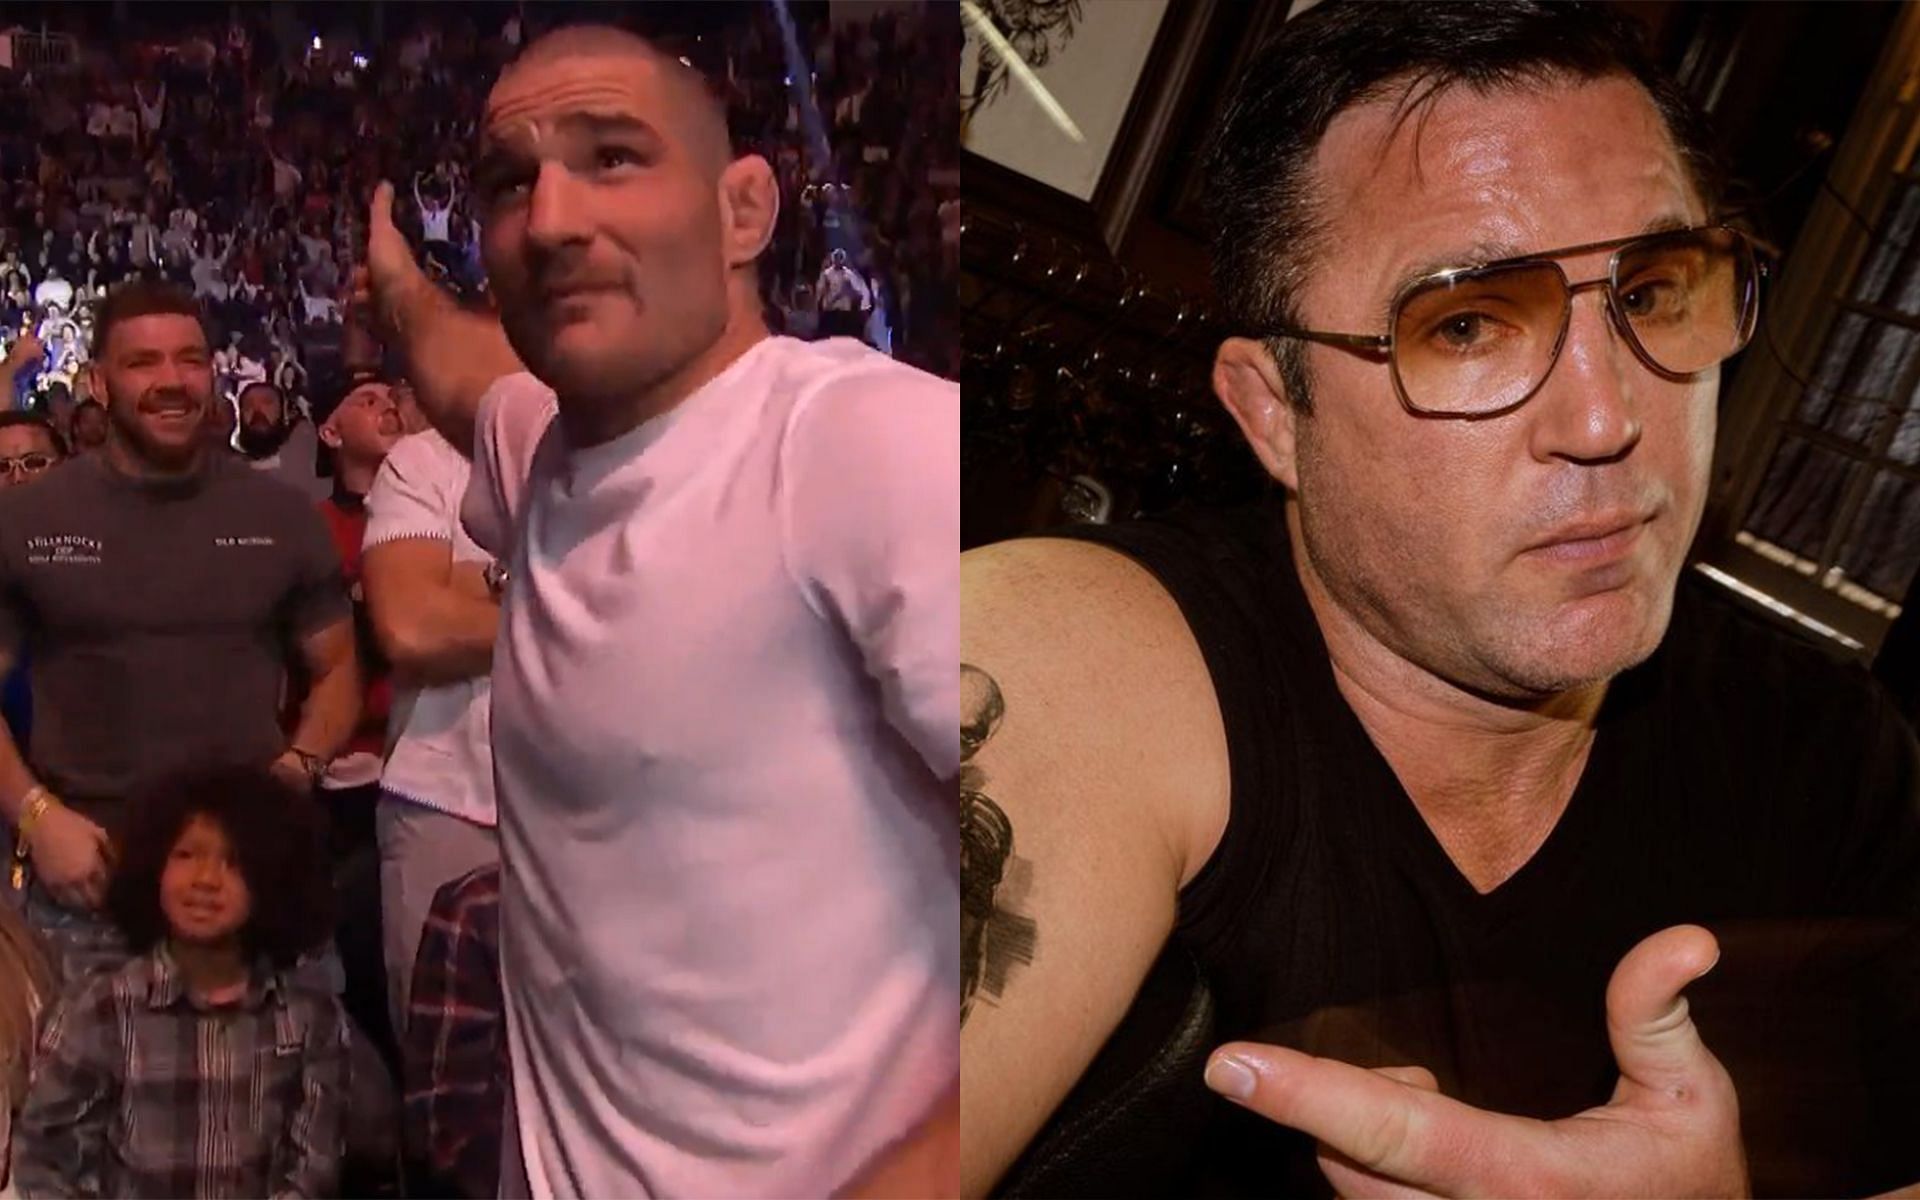 Sean Strickland and Dricus Du Plessis moments before the UFC 296 brawl (left) and Chael Sonnen (right) (Images Courtesy: @UFC X and @sonnench Instagram)